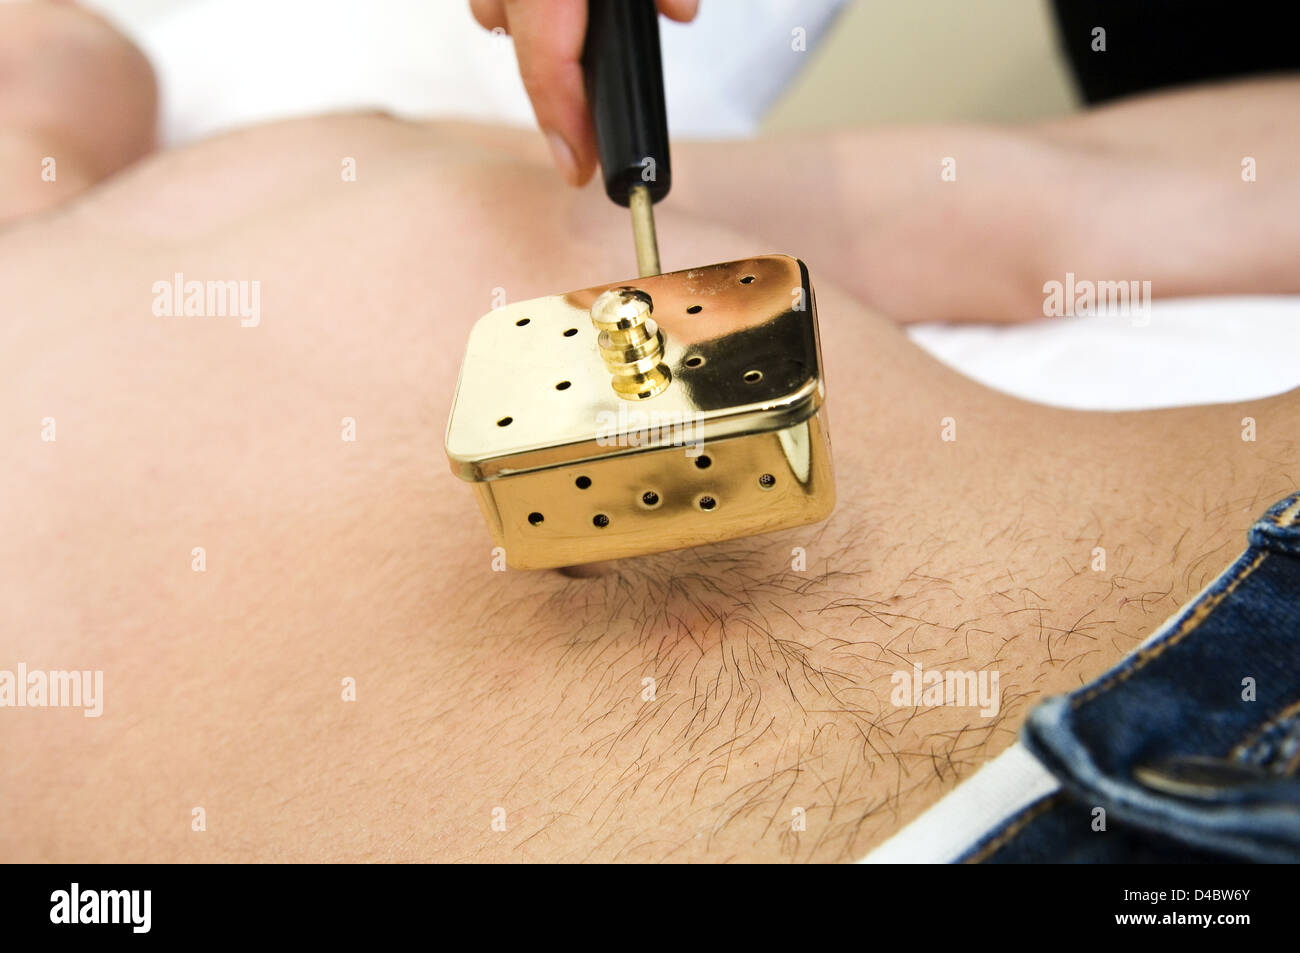 Moxibustion Oriental medicine technique in Chinese herb called mugwort or Artemesia Vulgaris used apply heat acupuncture point Stock Photo